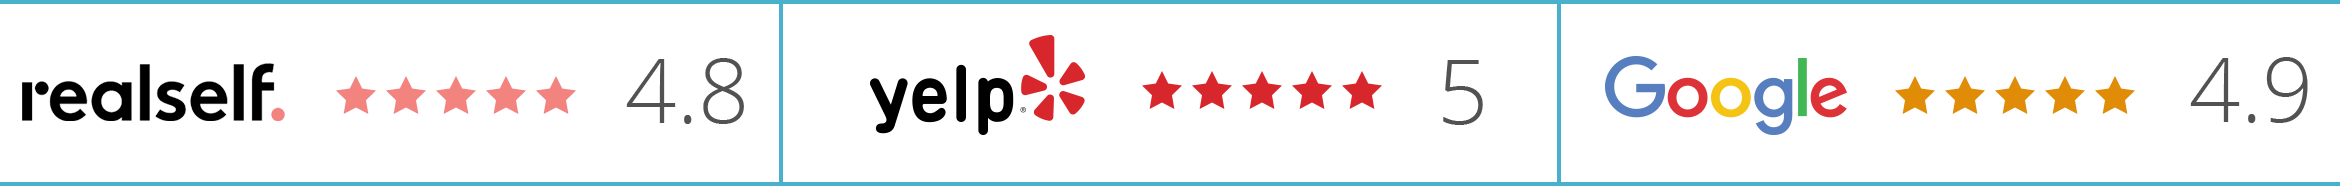 RealSelf, Yelp, and Google logos and listings of Dr. Mustoe's patient review scores on their sites